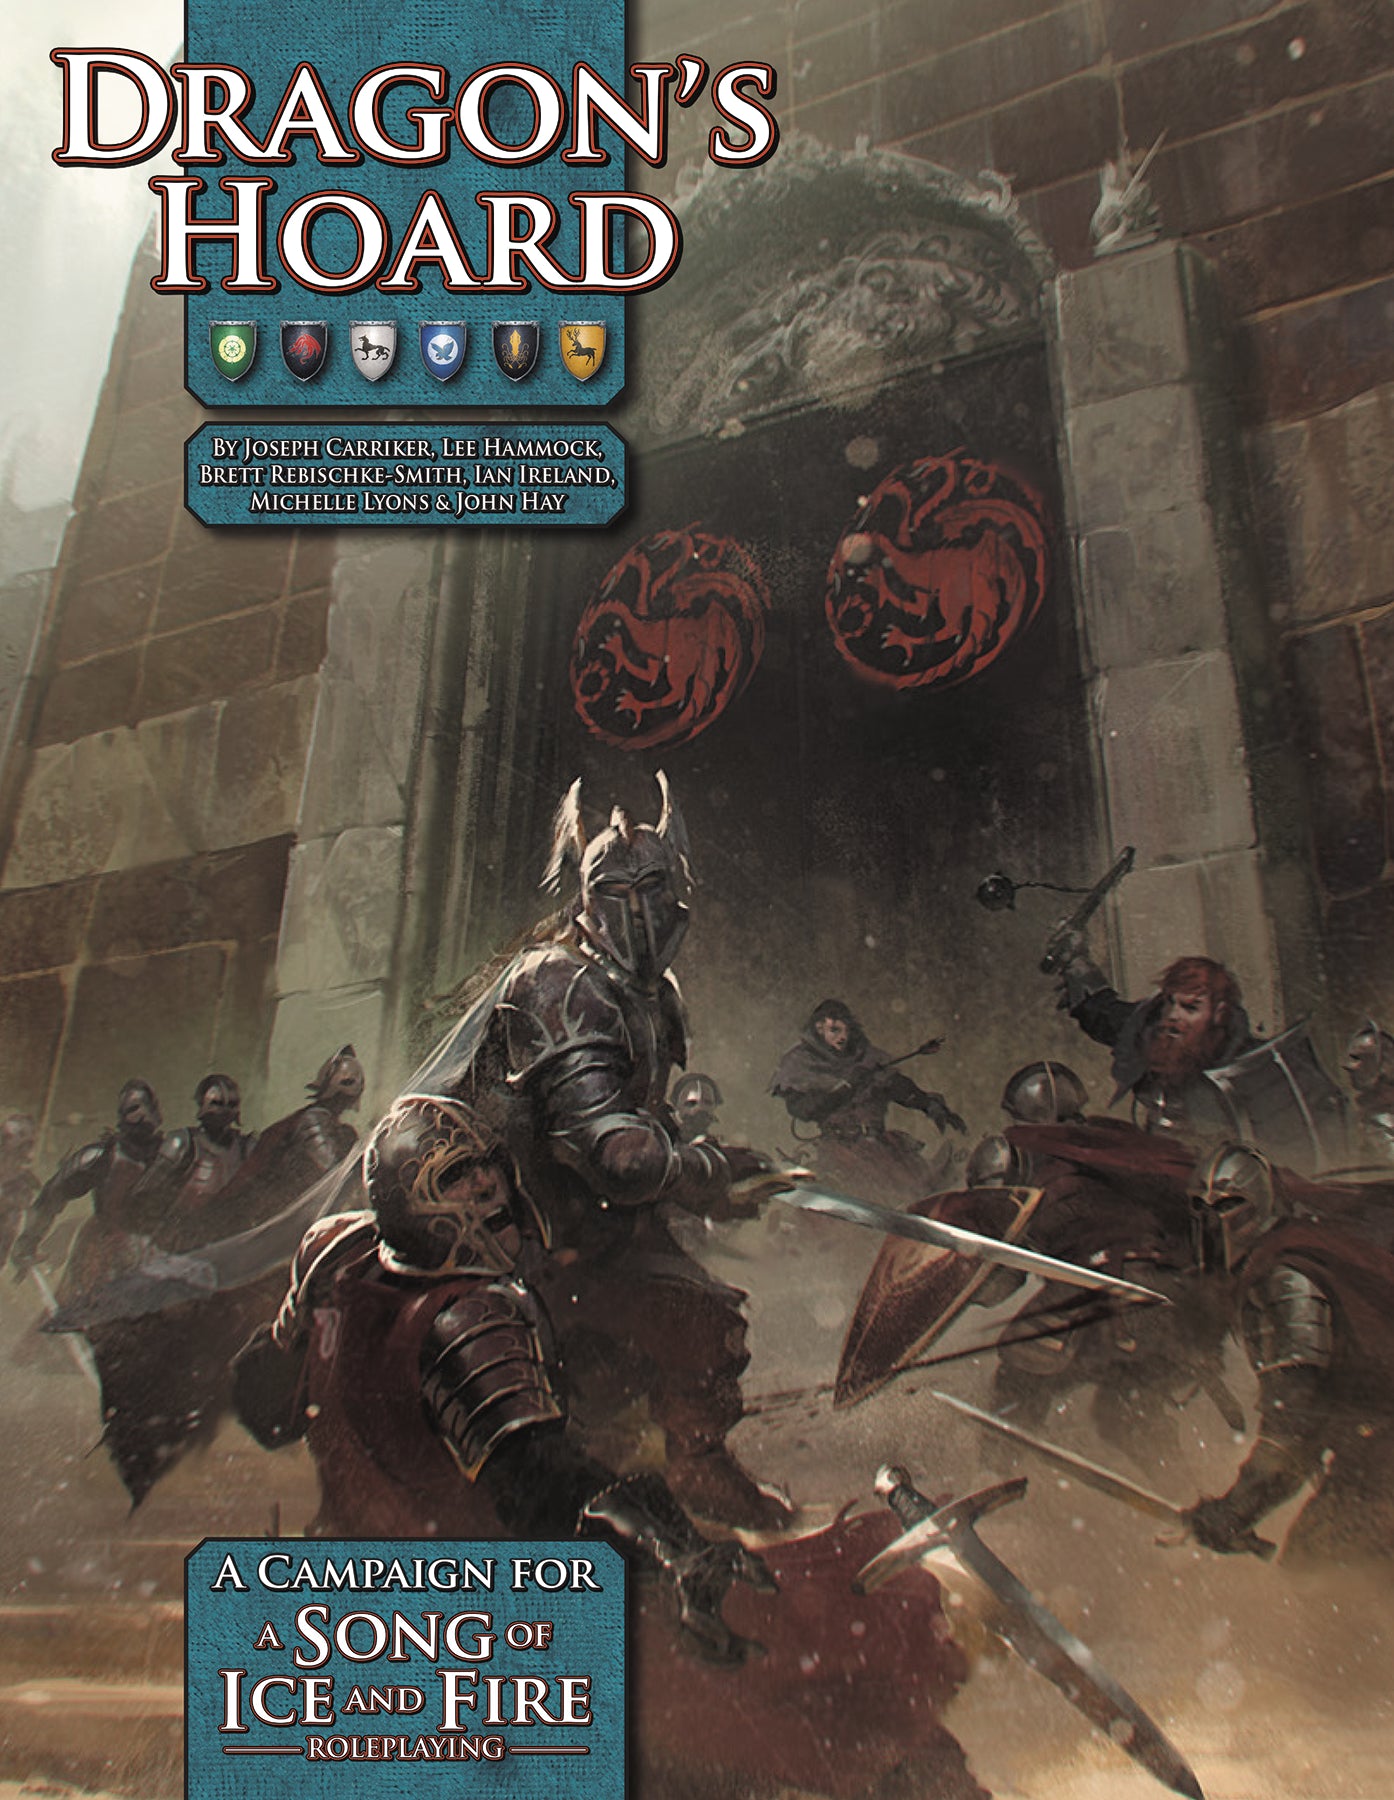 SONG OF ICE AND FIRE RPG DRAGONS HOARD CAMPAIGNCOVER